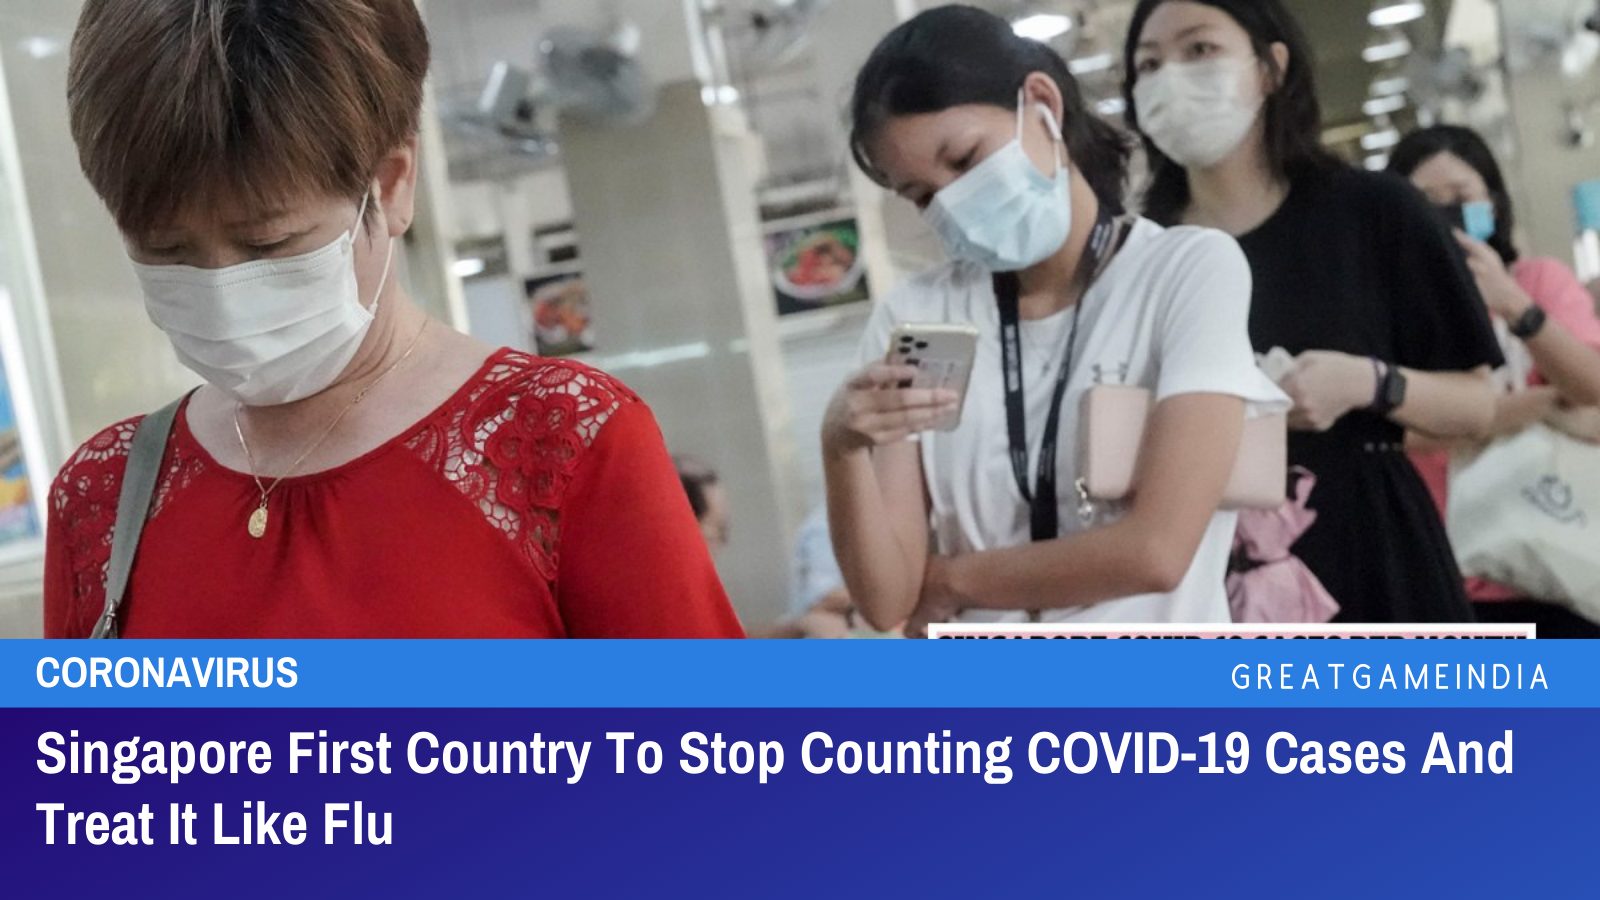 Singapore First Country To Stop Counting Daily COVID-19 Cases And Treat It Like Normal Flu